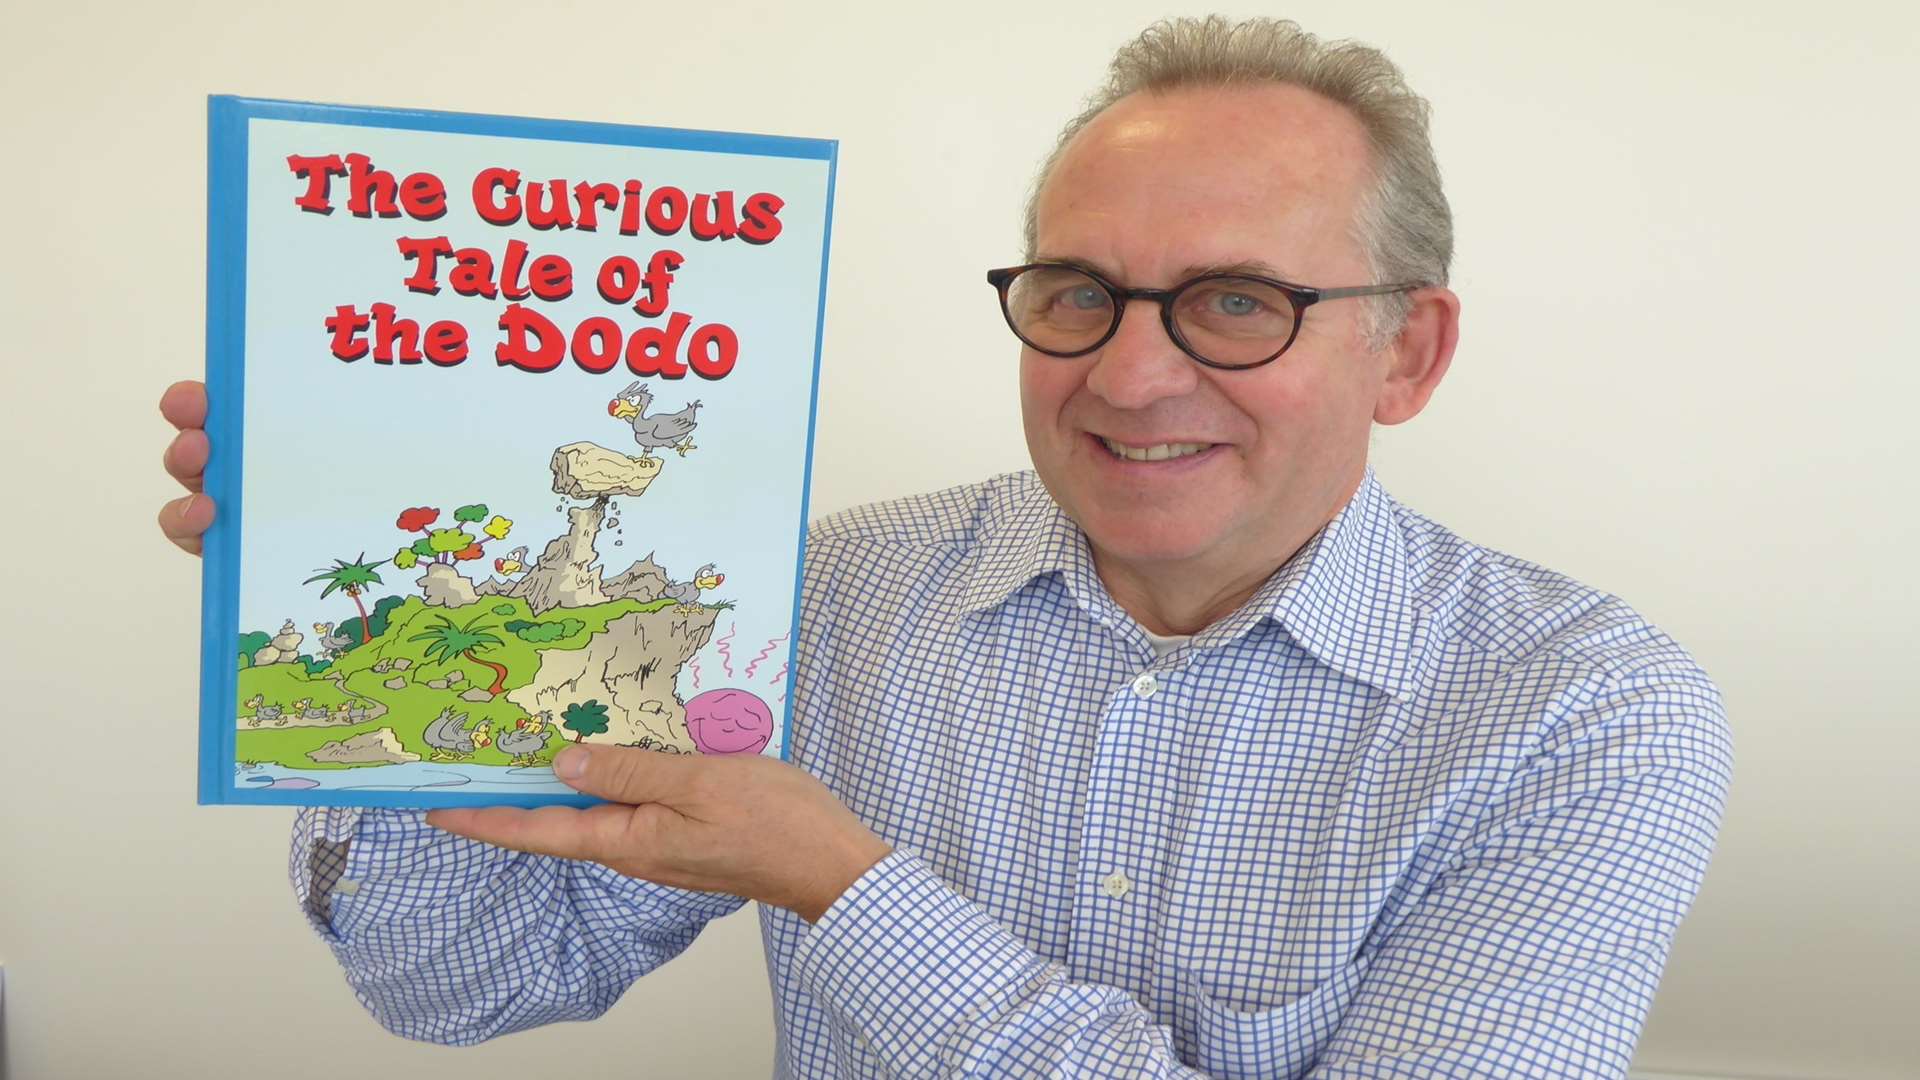 Whitstable author Anthony Cooper, holding his book The Curious Tale of the Dodo, is working with the KM Charity Team to promote World Book Day.